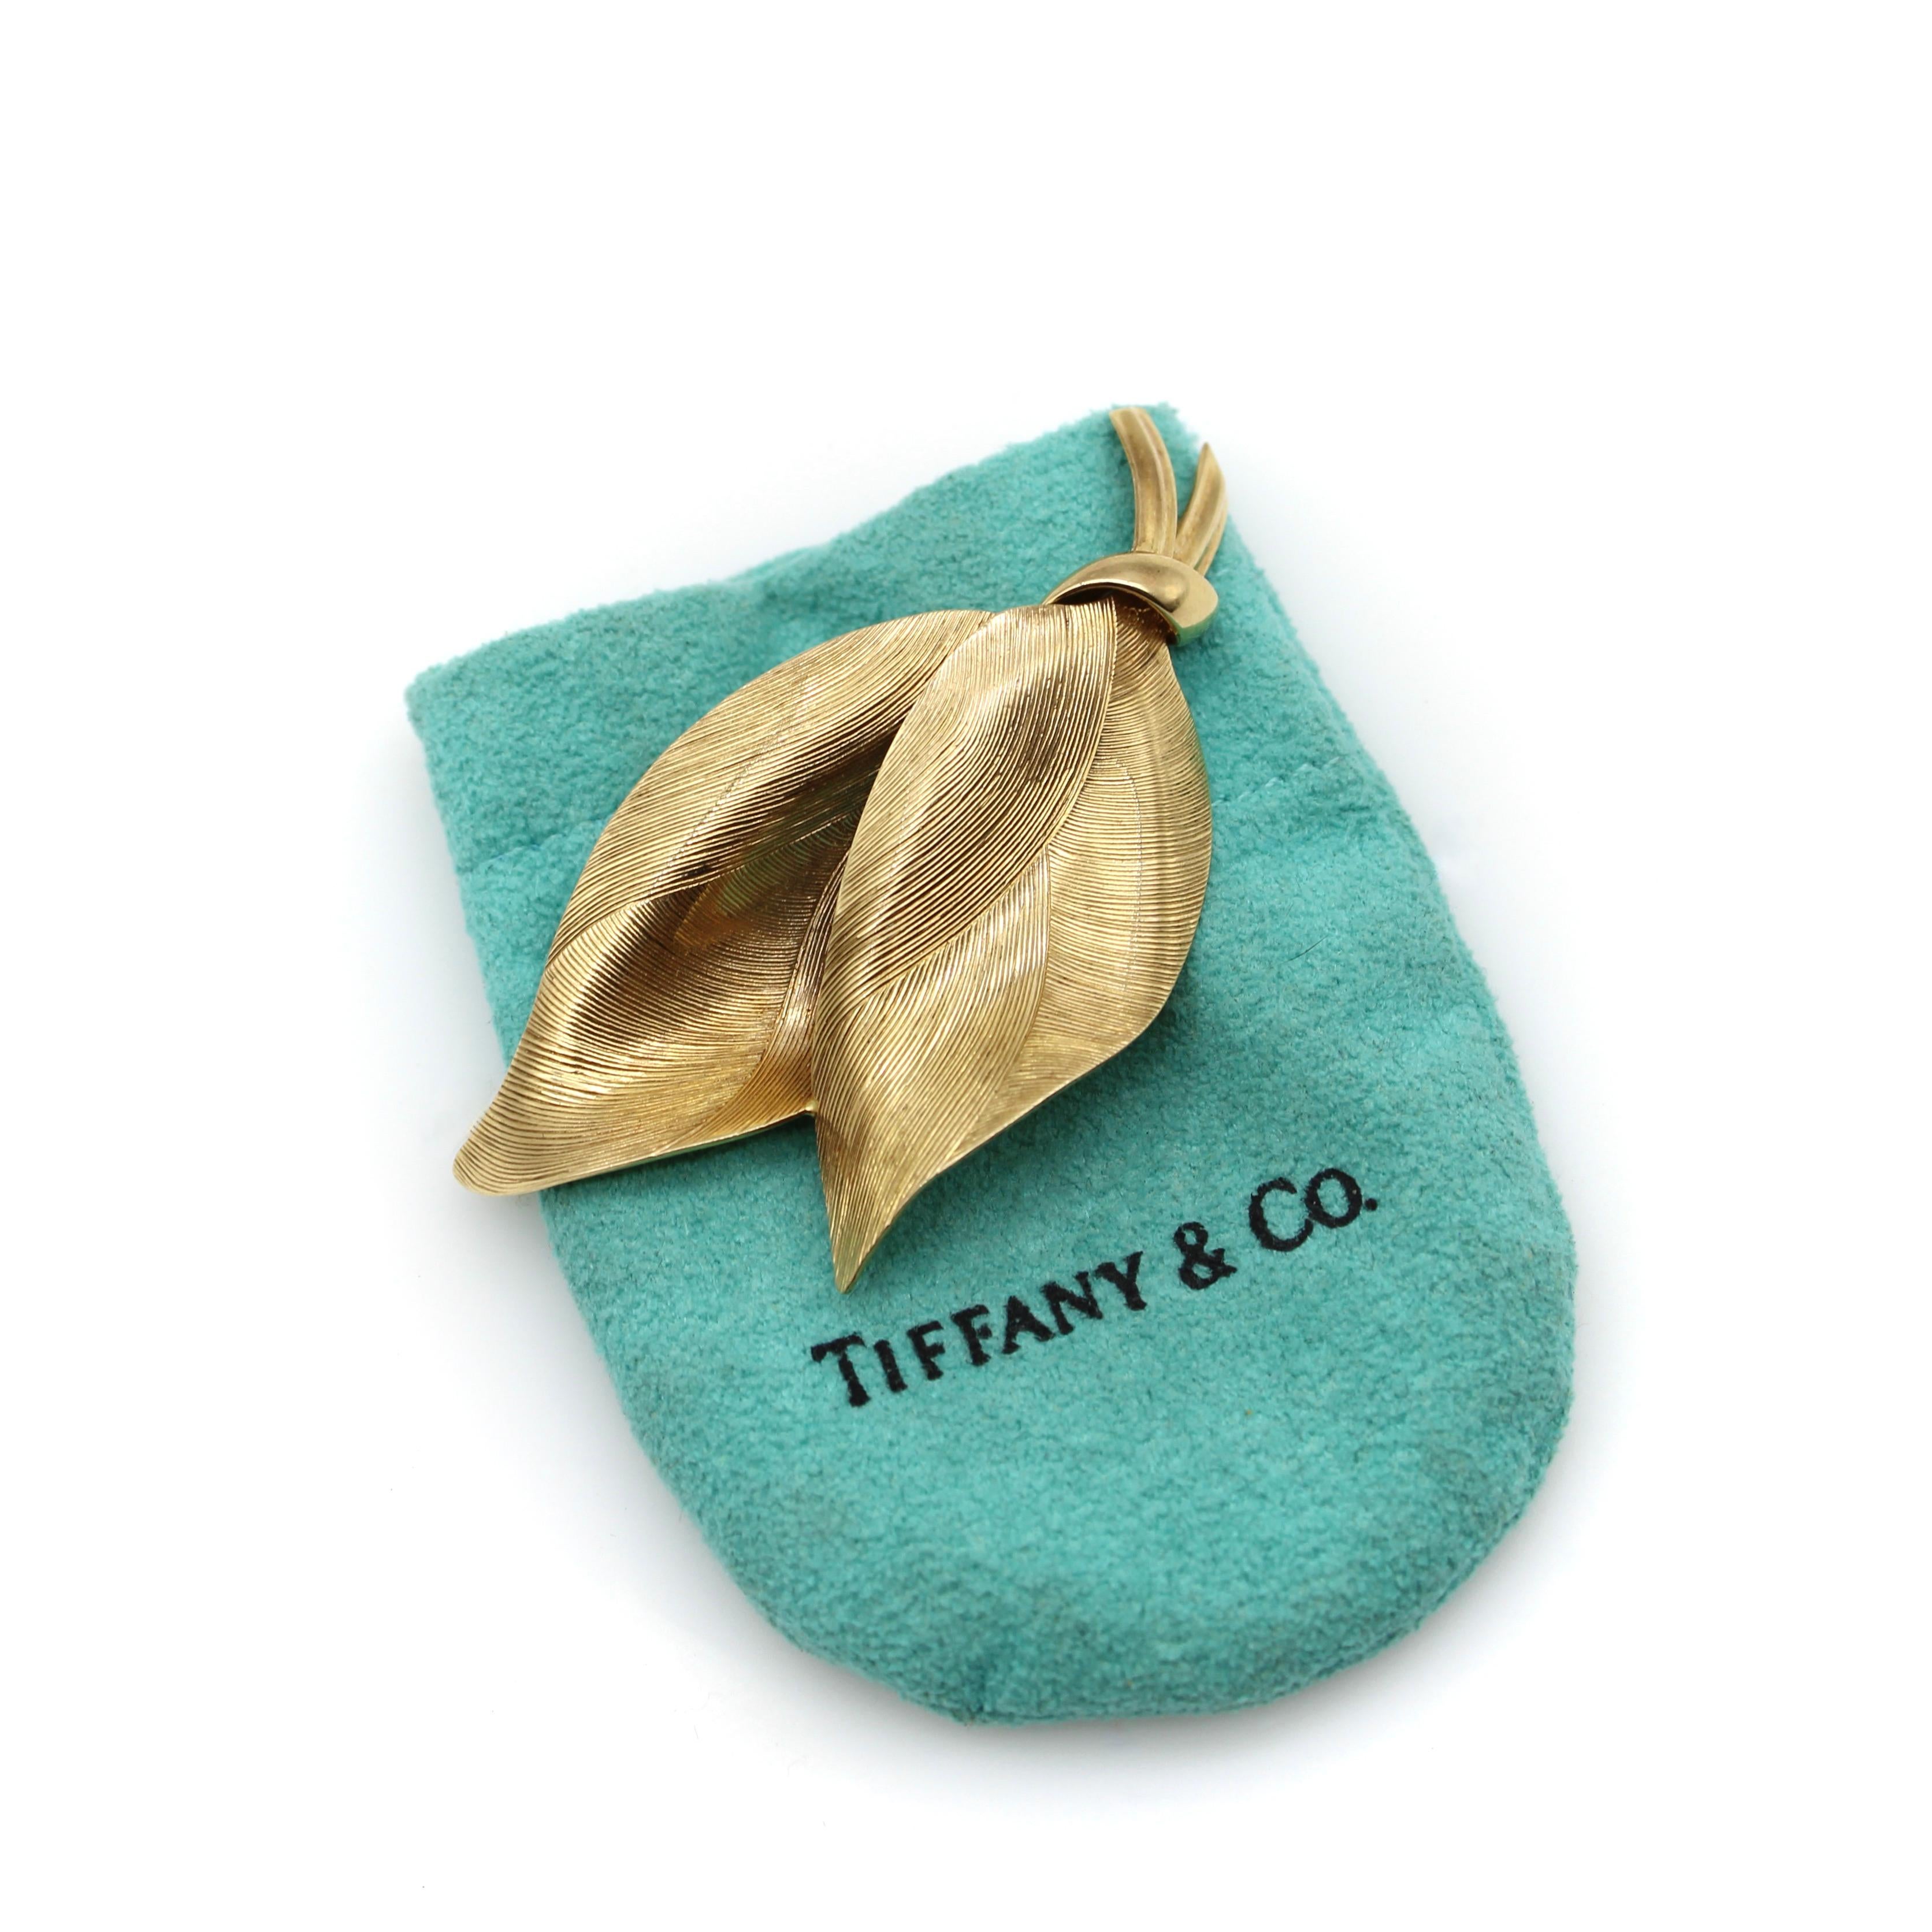 A classic Tiffany & Co. design, this 14k gold brooch is an abstract version of leaves with swaths of texture. The gold is hand-engraved with swooping lines that catch the light from many angles. The dual leaves nestle into each other and are tied